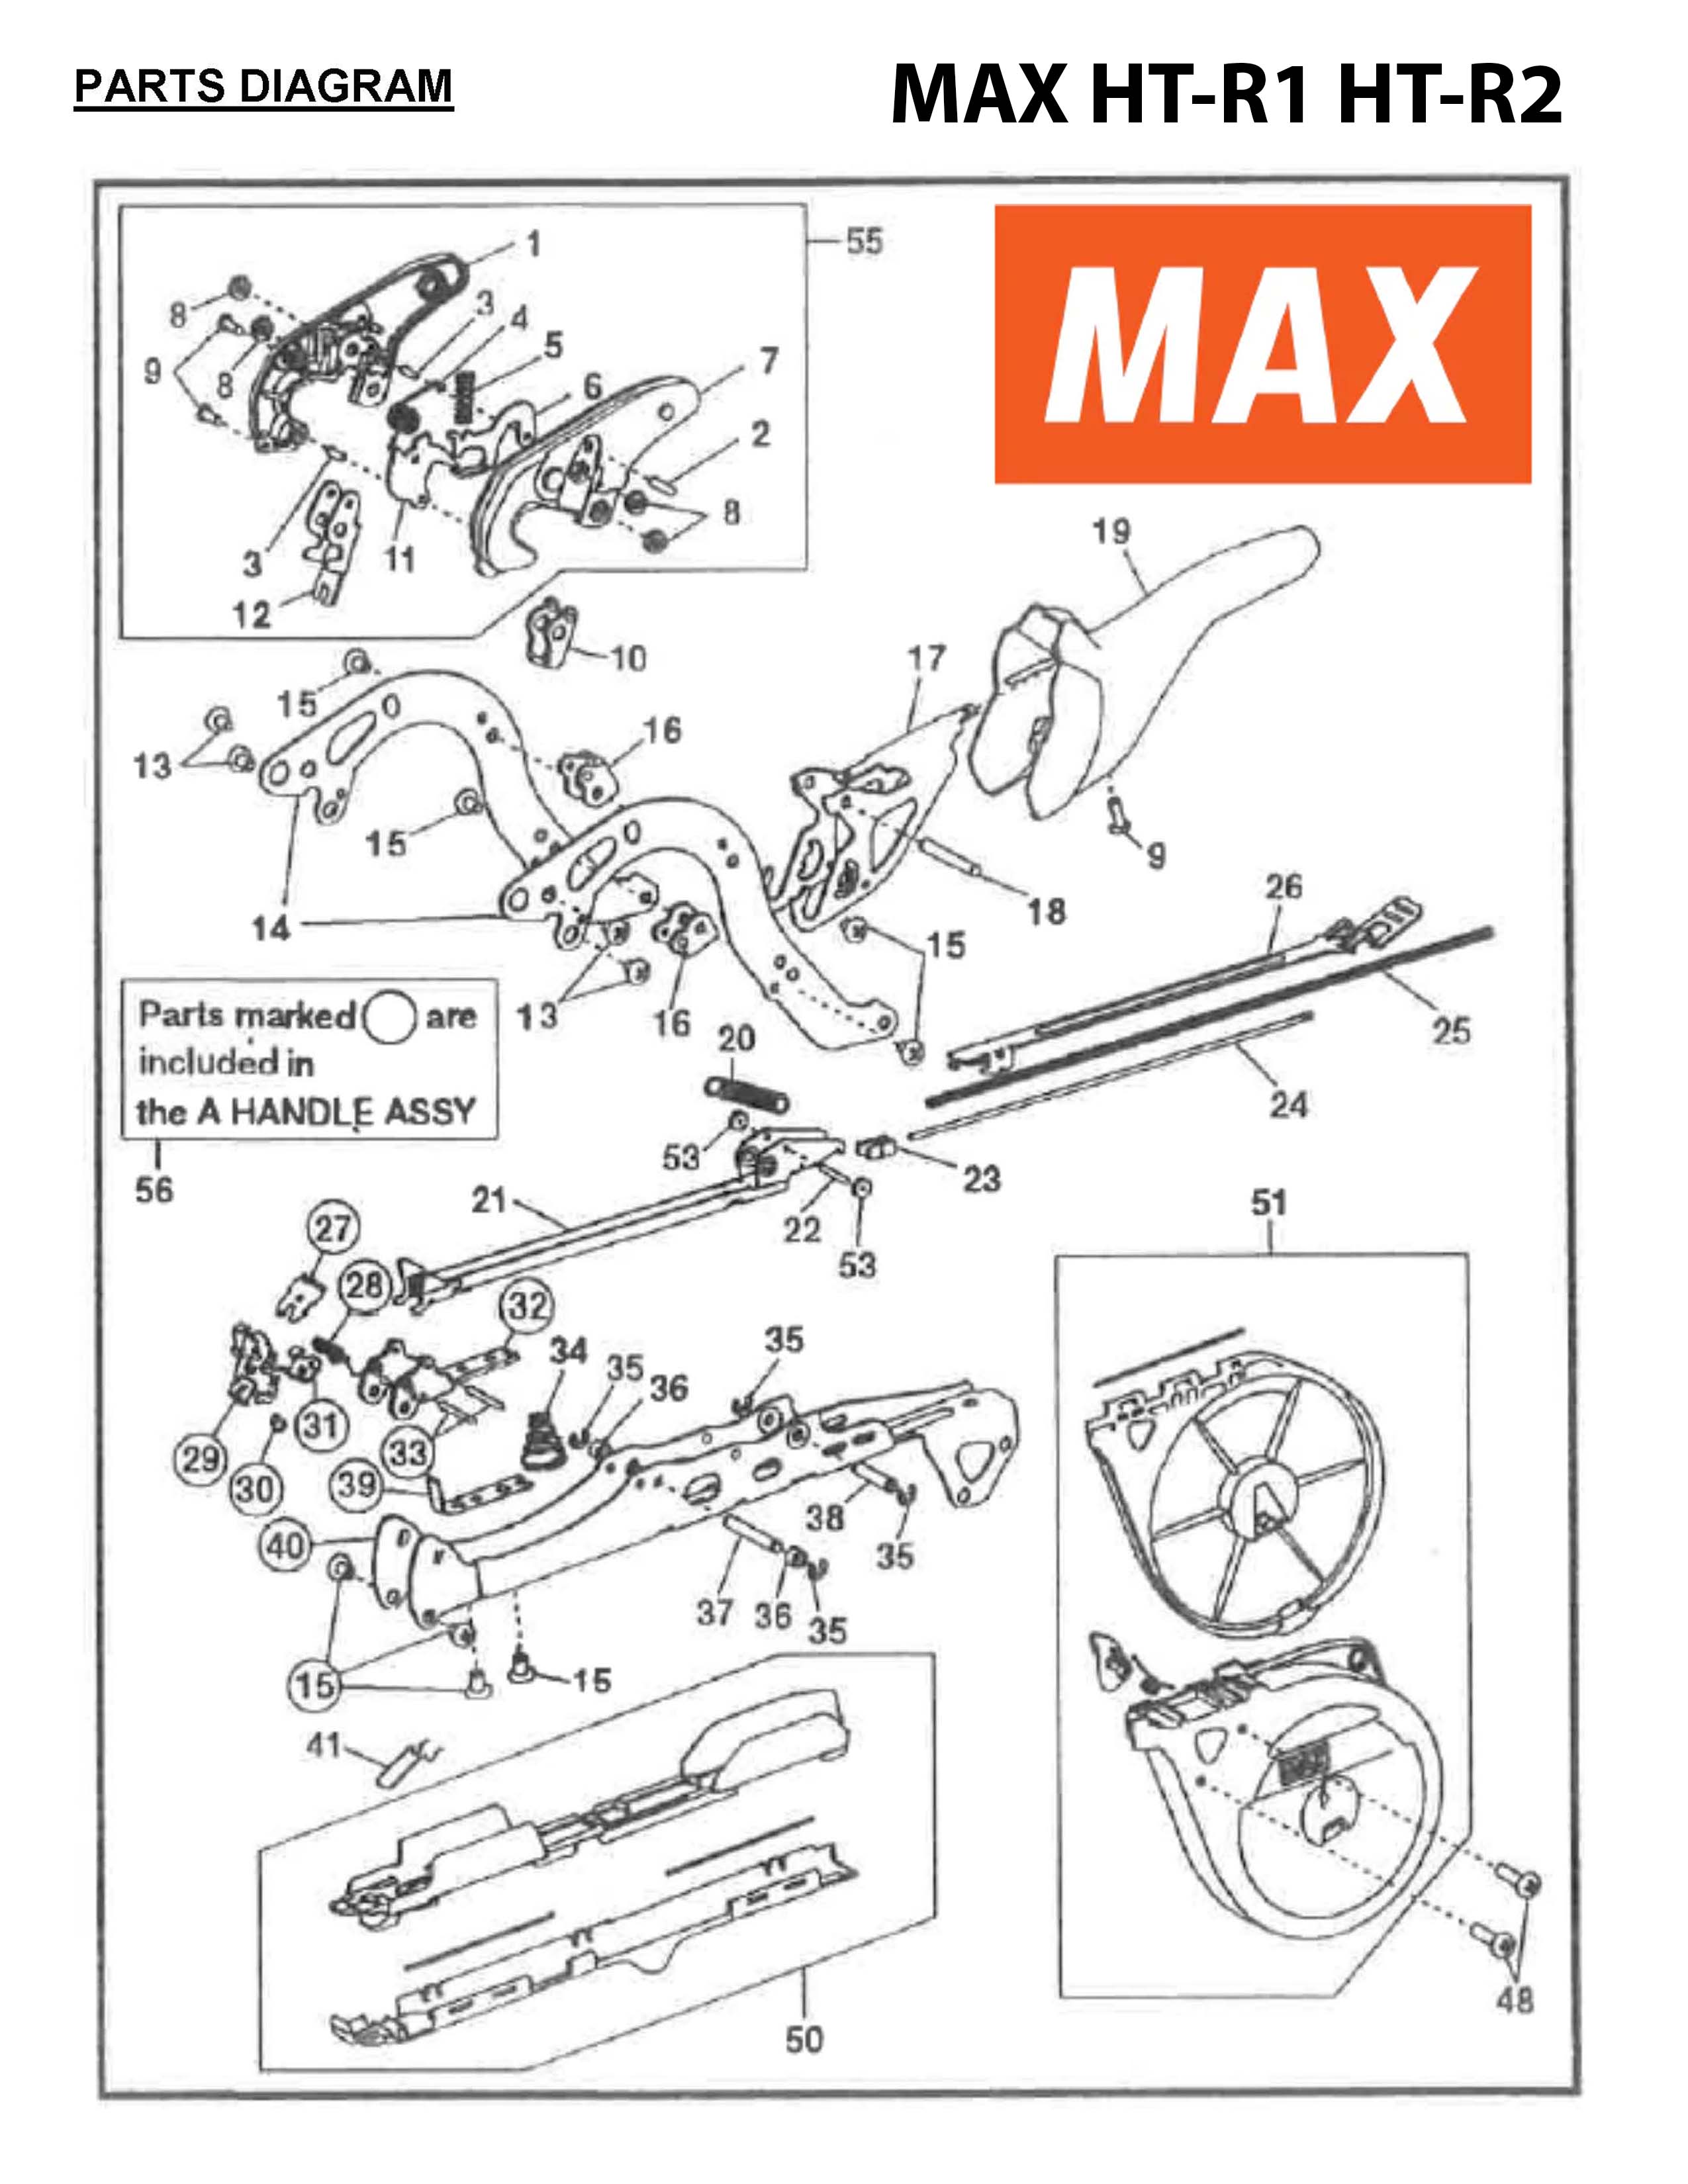 MAX Tapener Part HT70068 TAPE CATCH ASSY Fits MAX HT-R1 HT-R2 #55